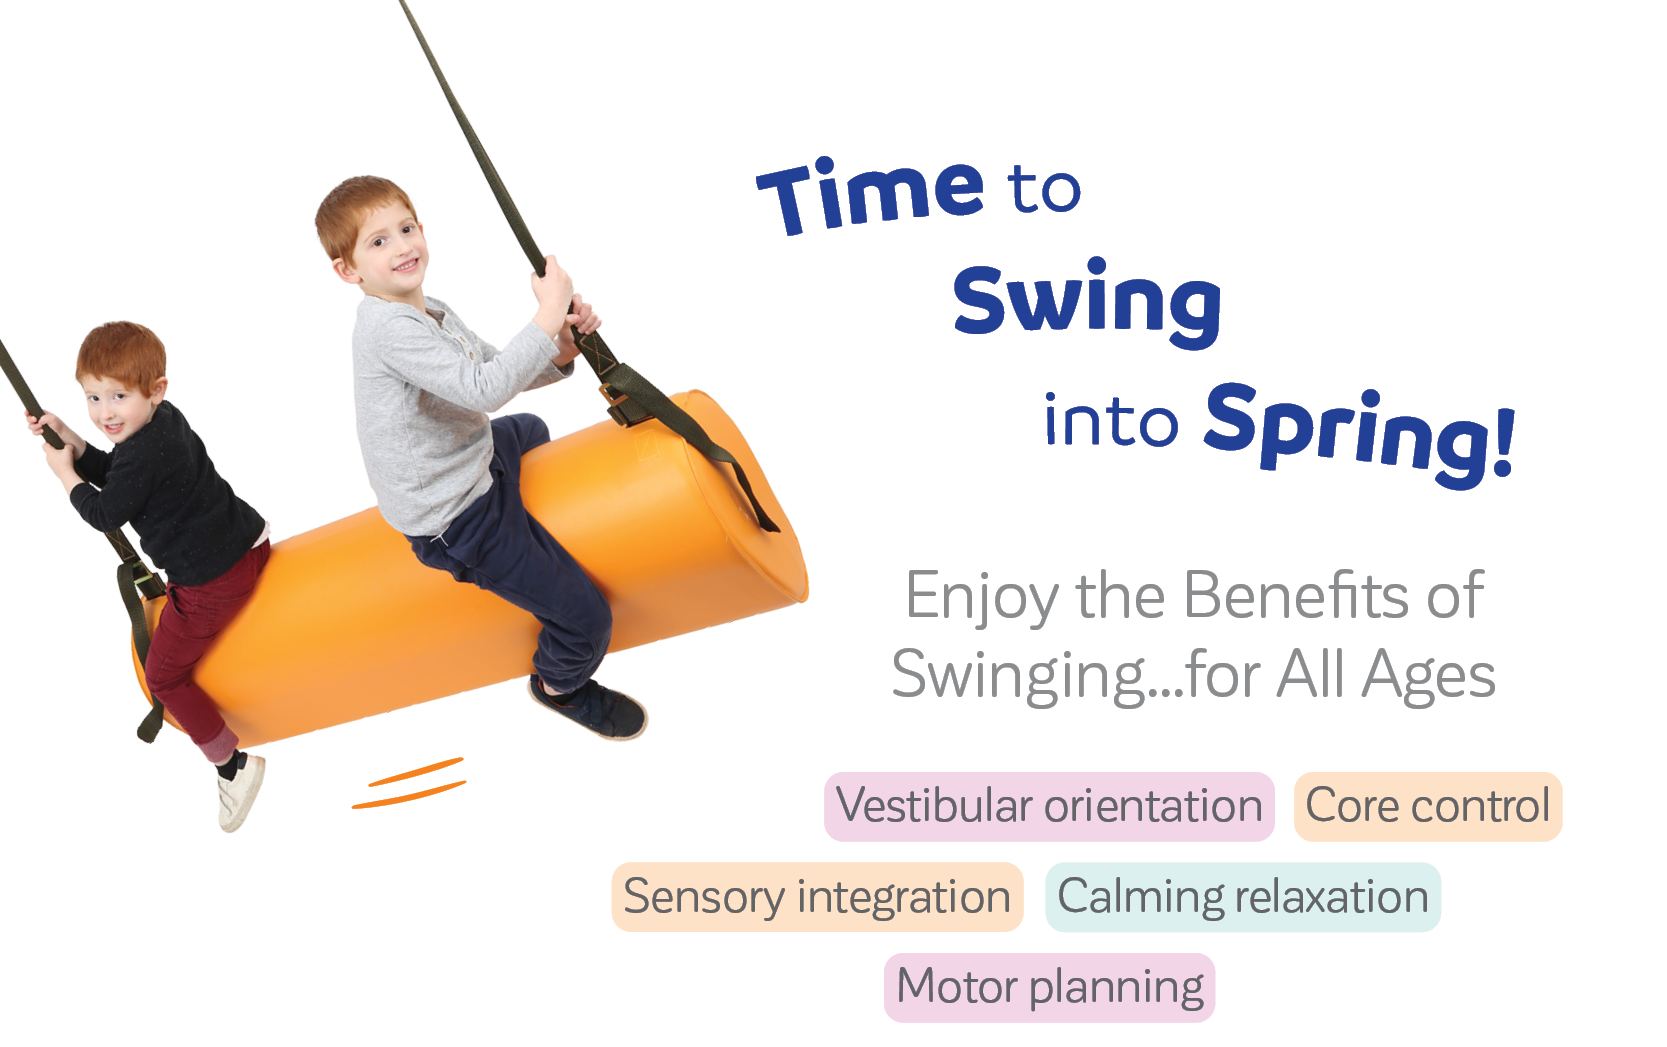 Time to Swing into Spring!